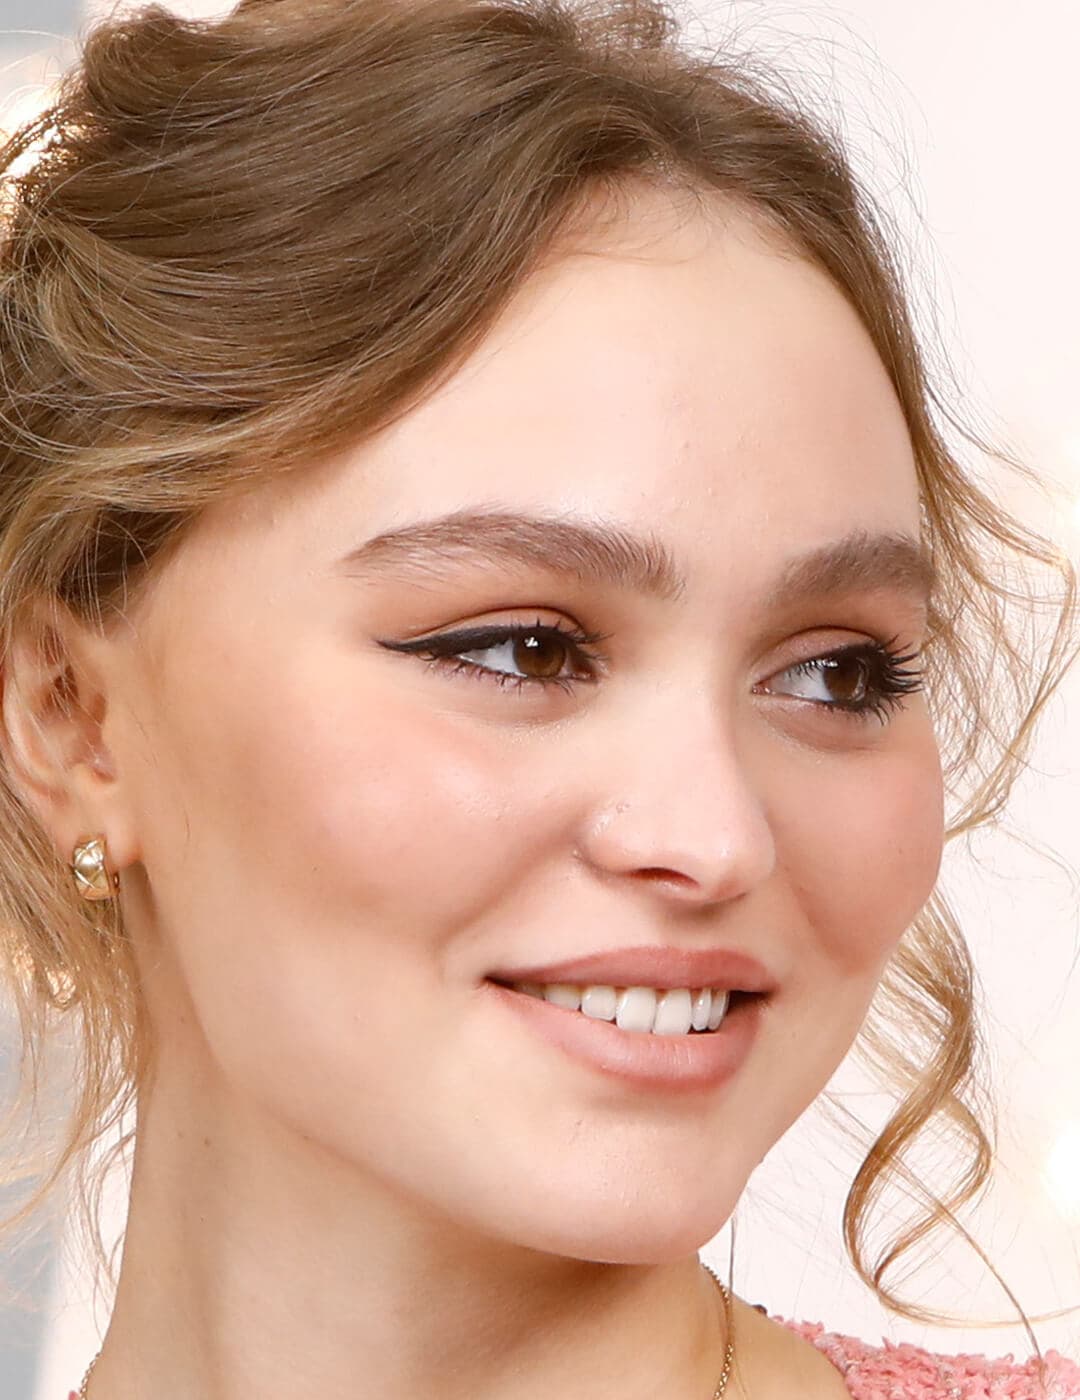 A photo of Lily Rose Depp with a winged eyeliner 